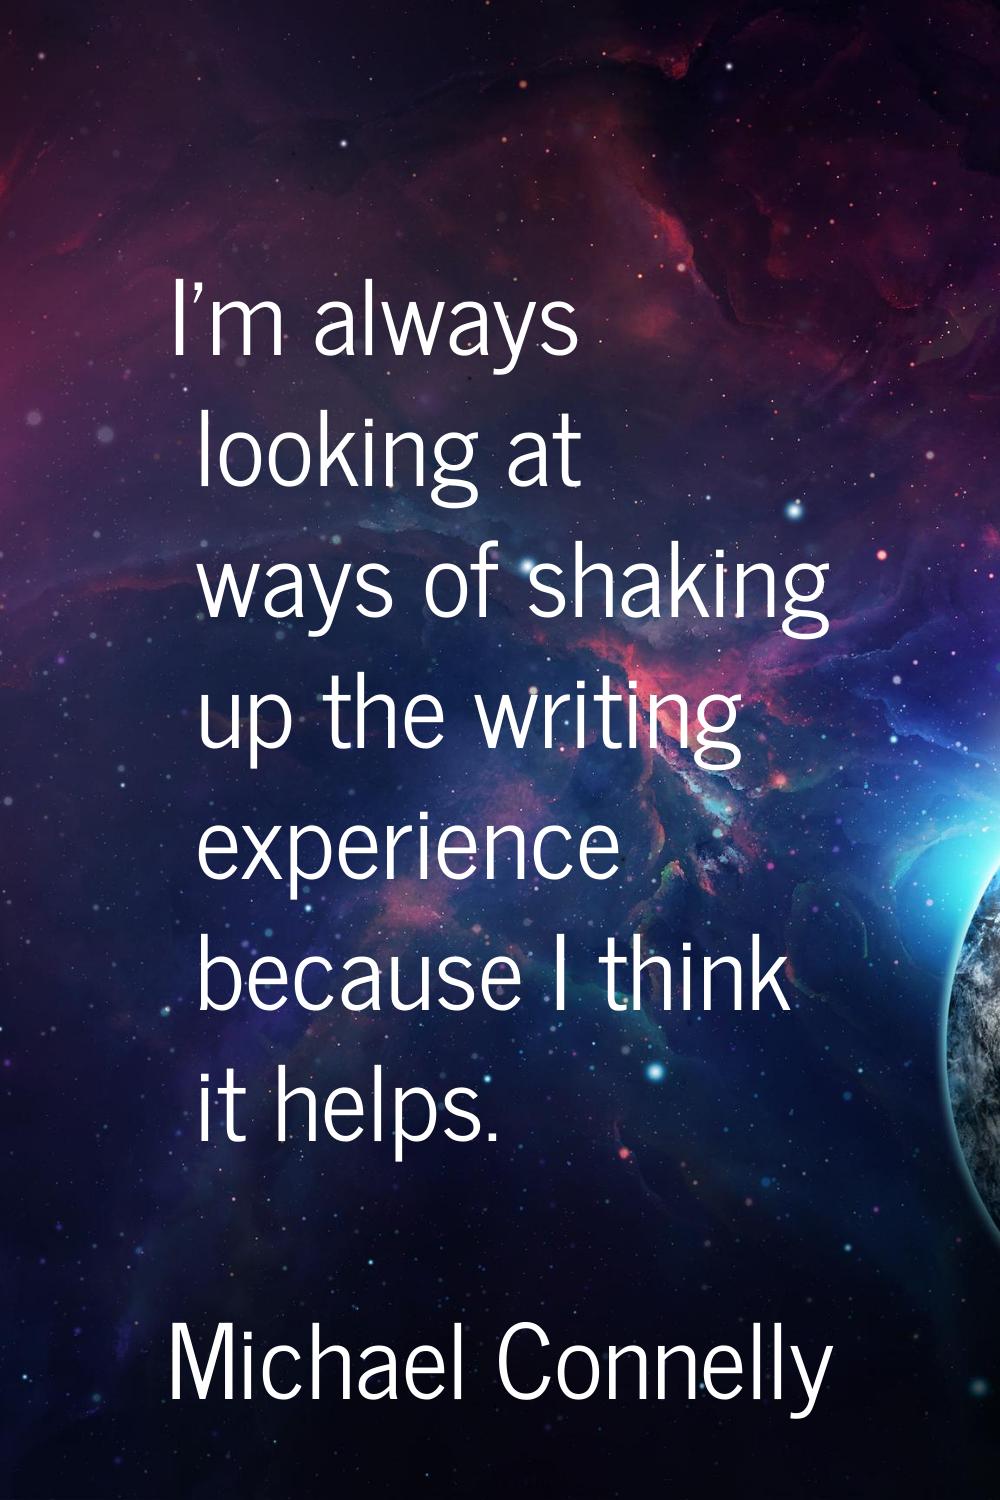 I'm always looking at ways of shaking up the writing experience because I think it helps.